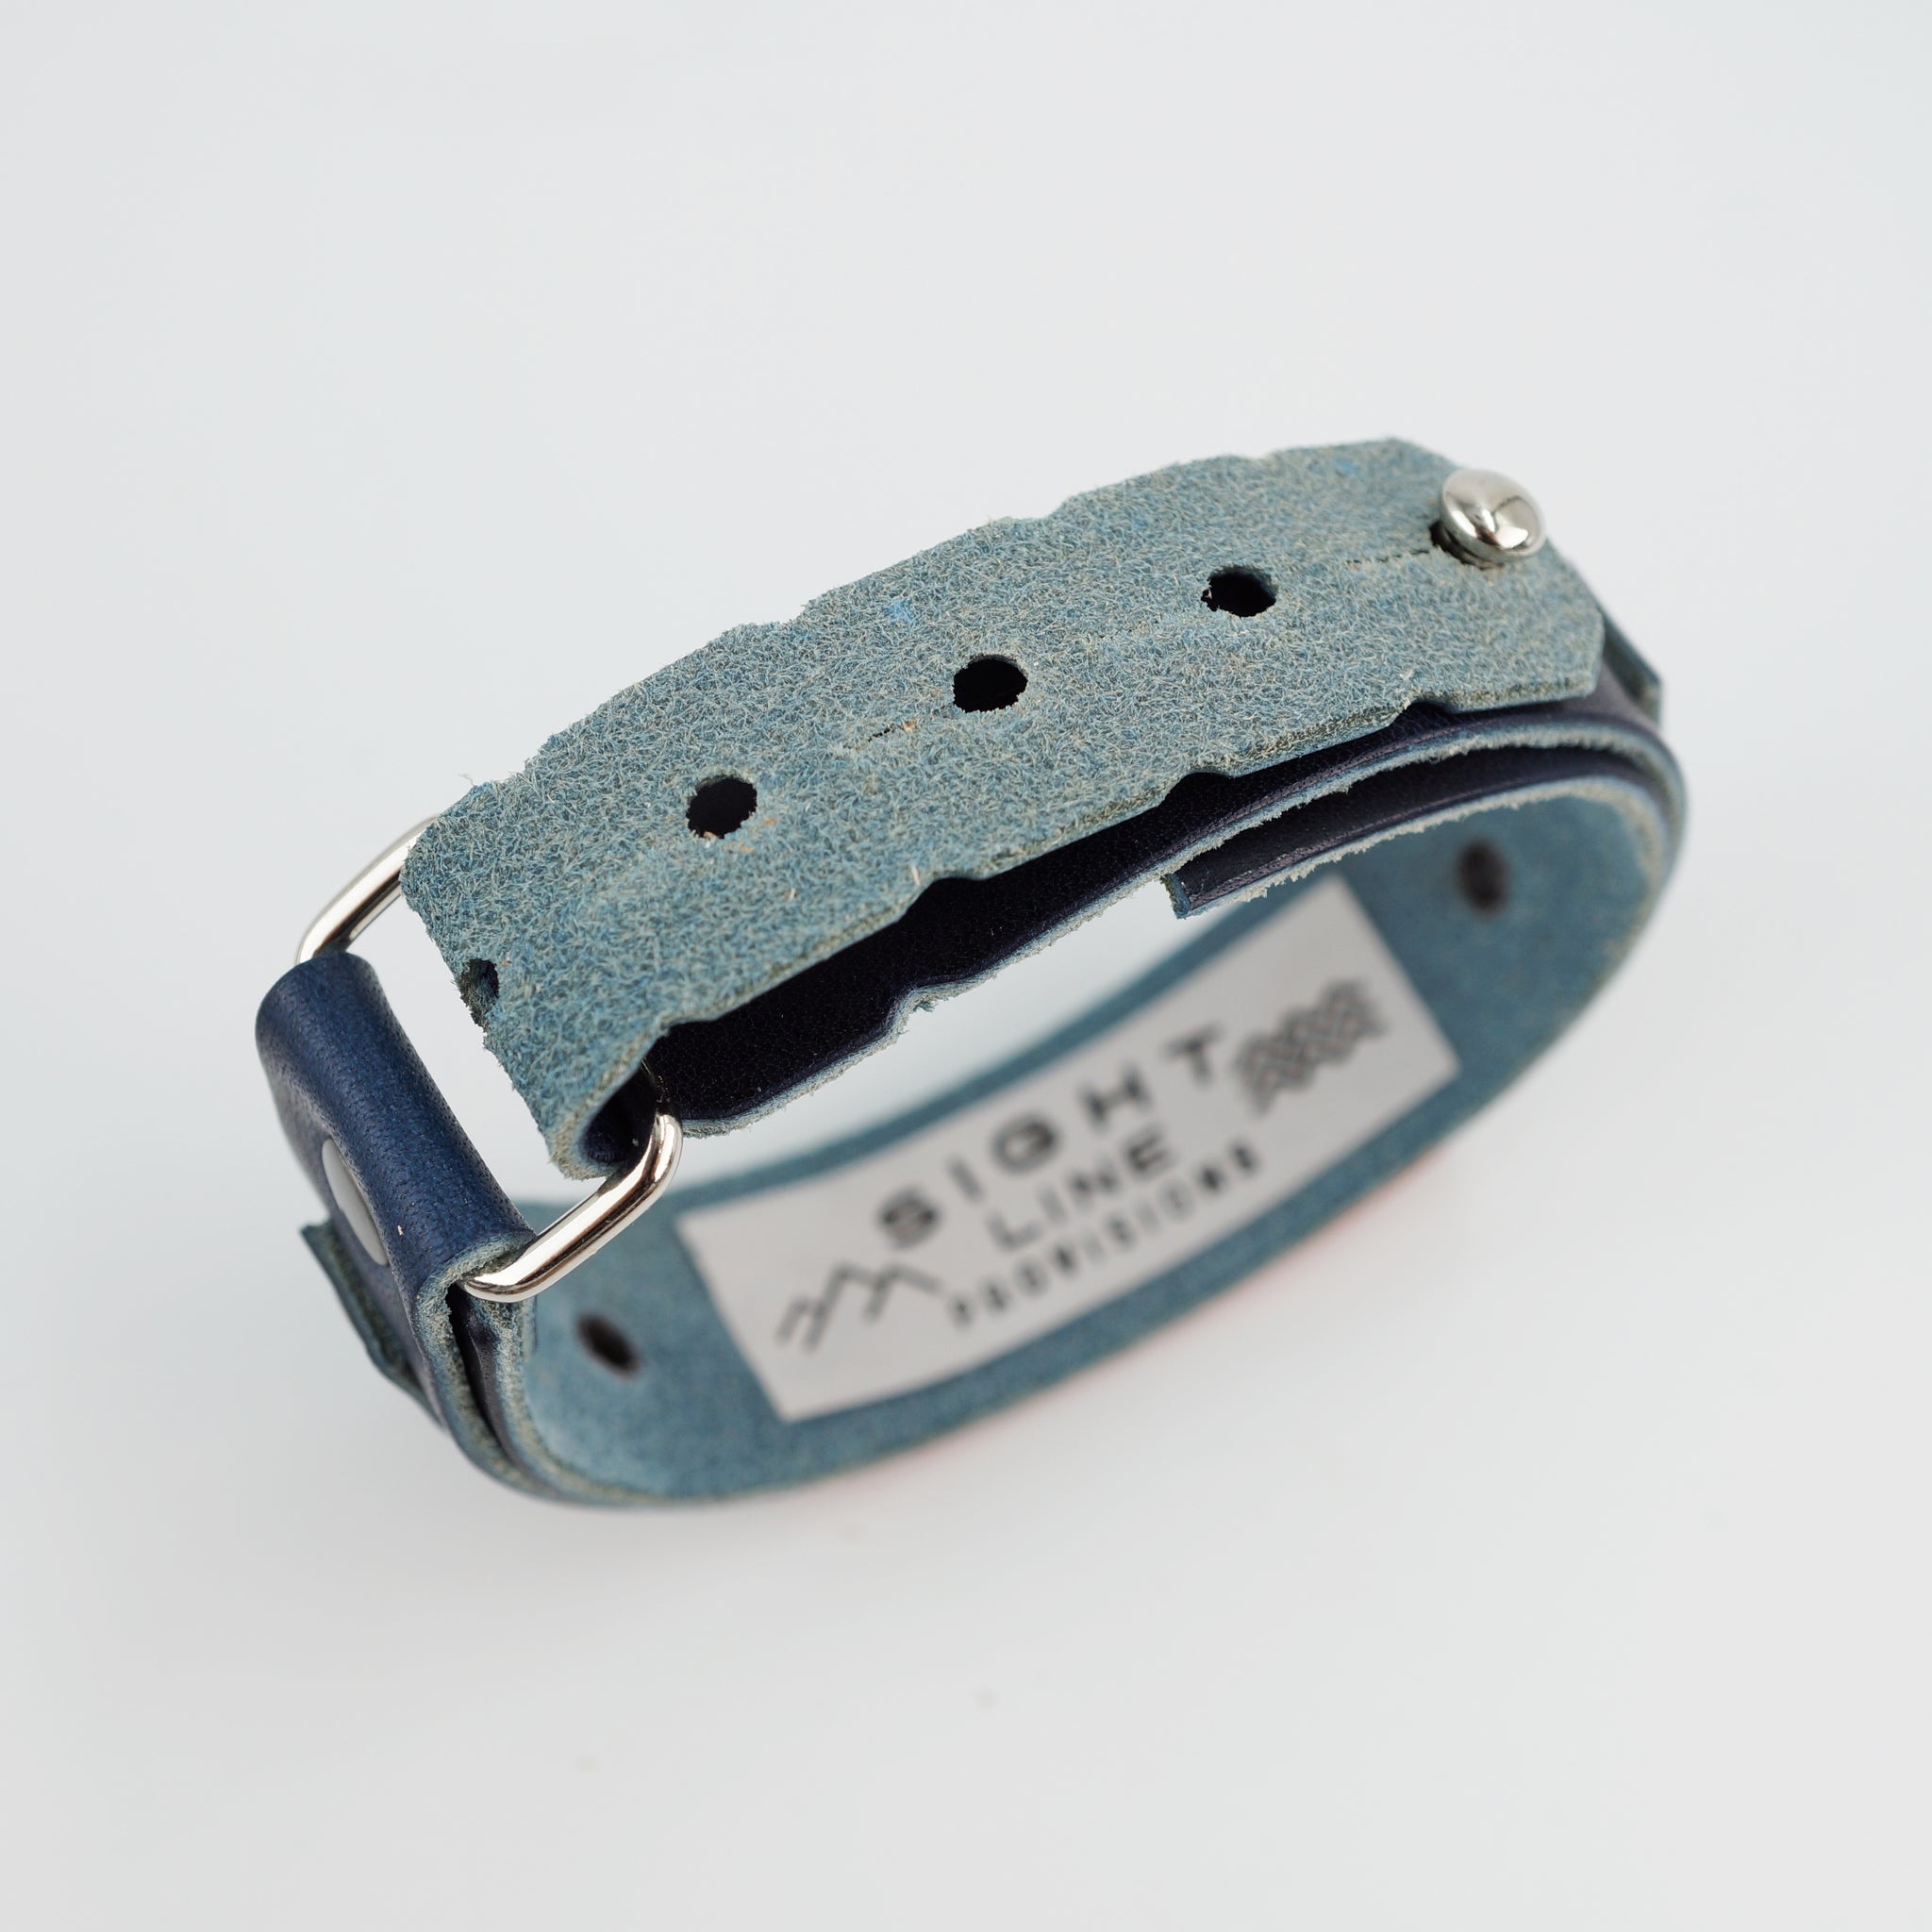 Sightline Provisions Sightline Provisions Bracelet - Steely Gray Trout 2.0